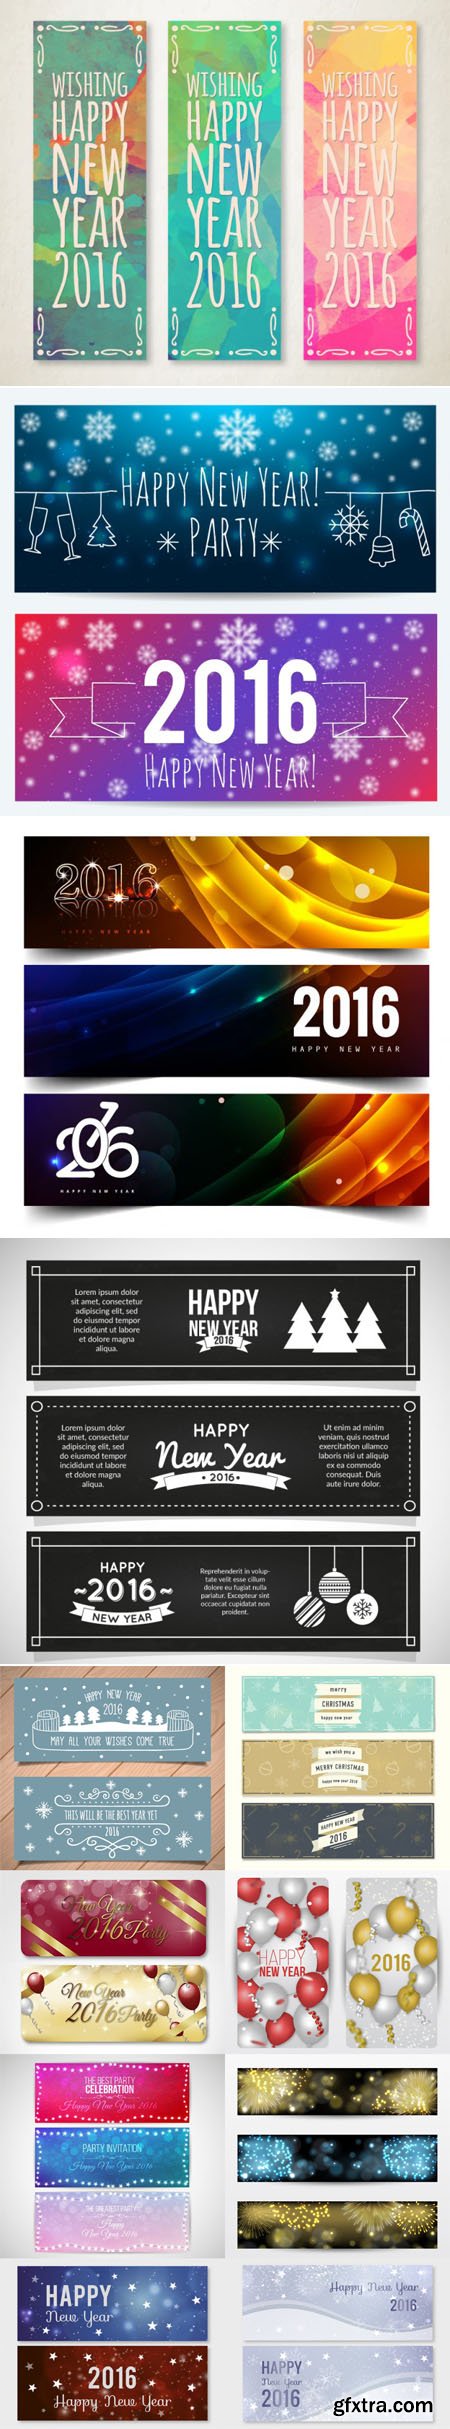 Happy New Year 2016 Banners in Vector [Vol.4]